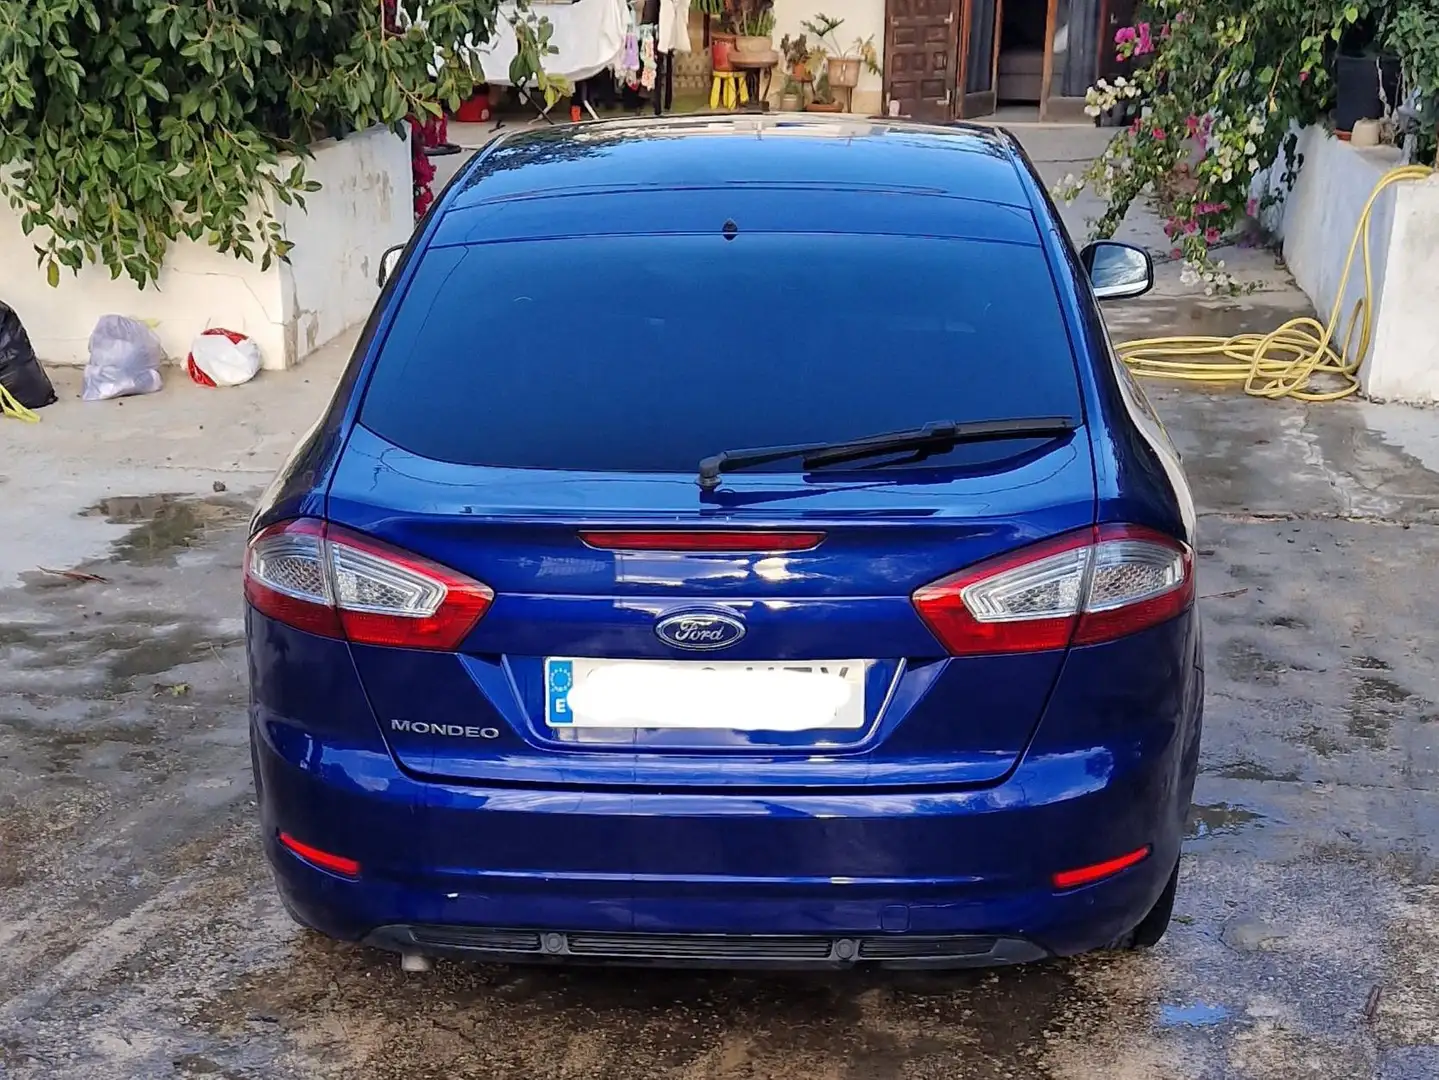 Ford Mondeo 2.0TDCi Limited Edition 140 Azul - 2